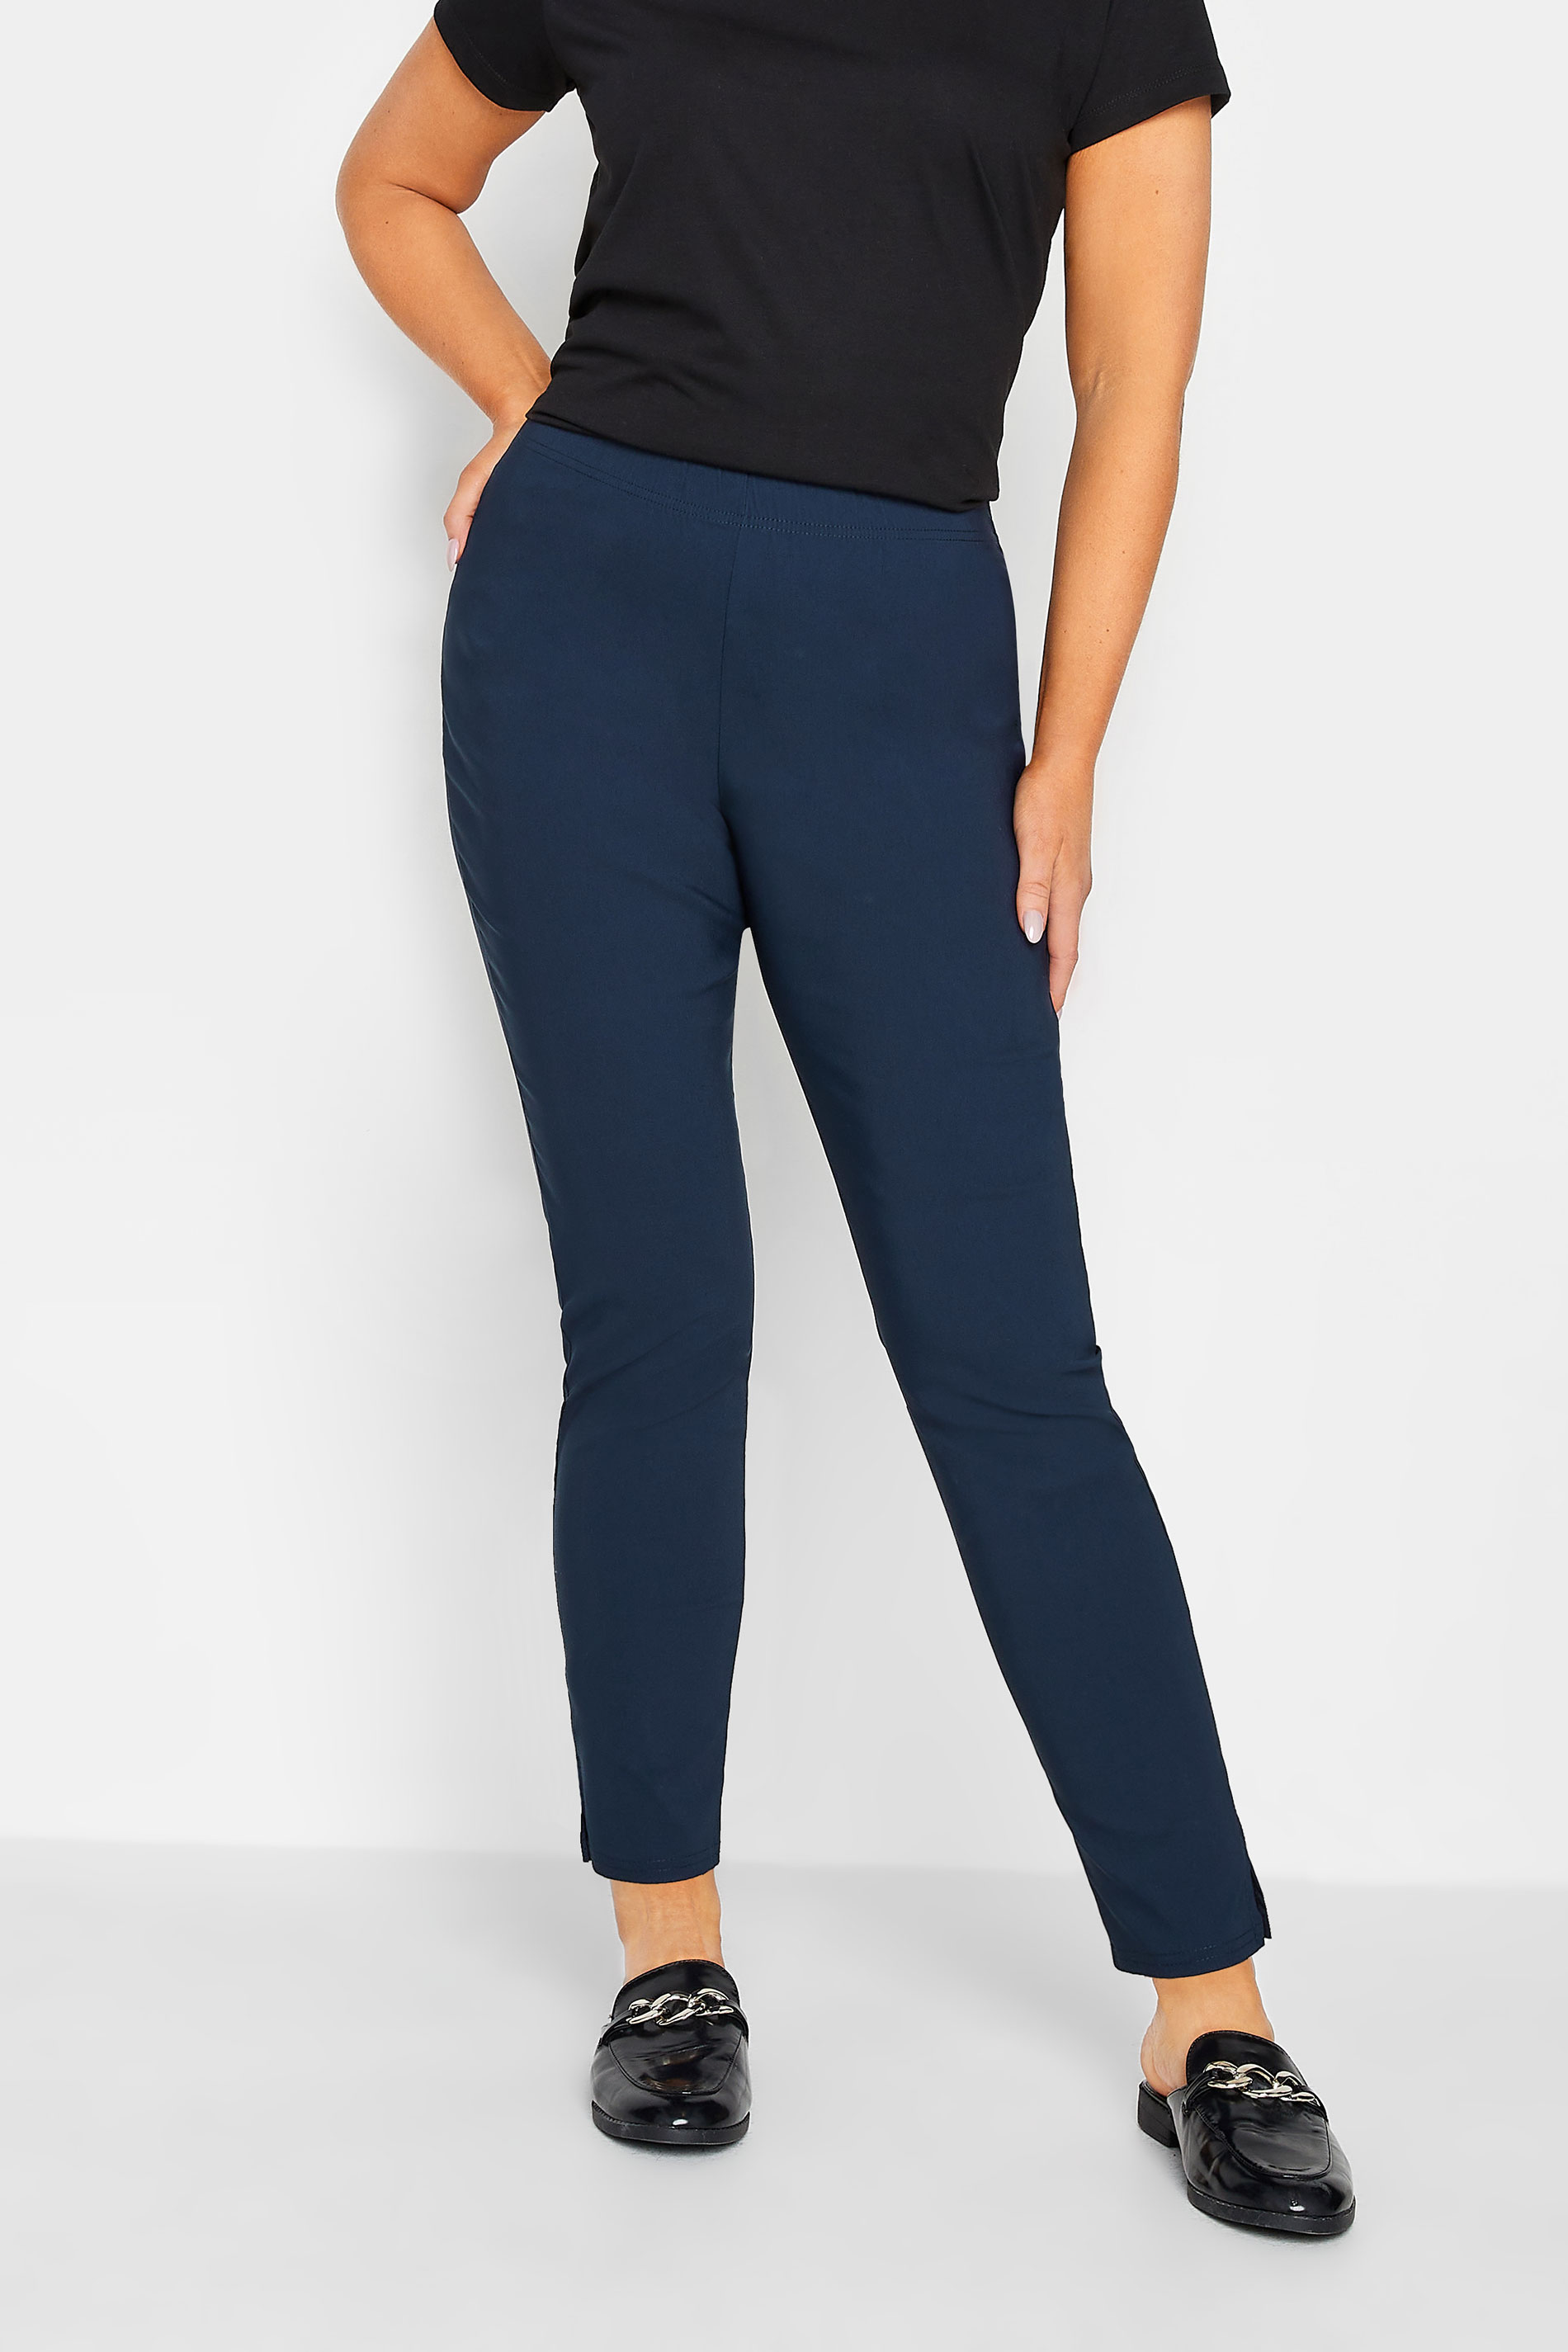 Helterskelter Navy Cotton Stretch Trousers | Stylins.co